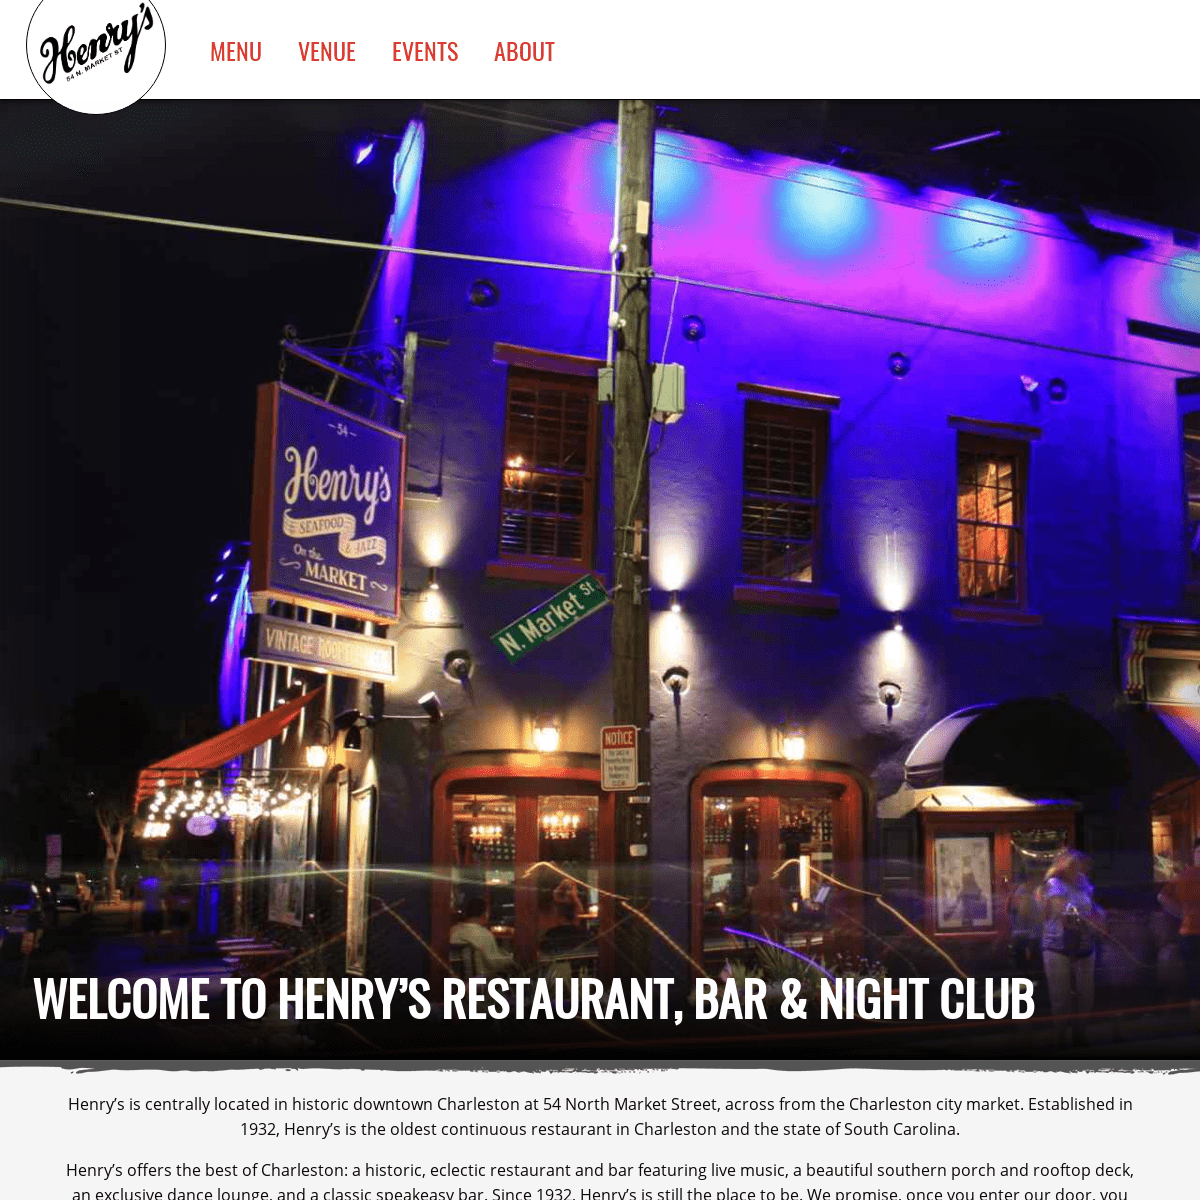 Welcome to Henry’s Restaurant, Bar & Night Club